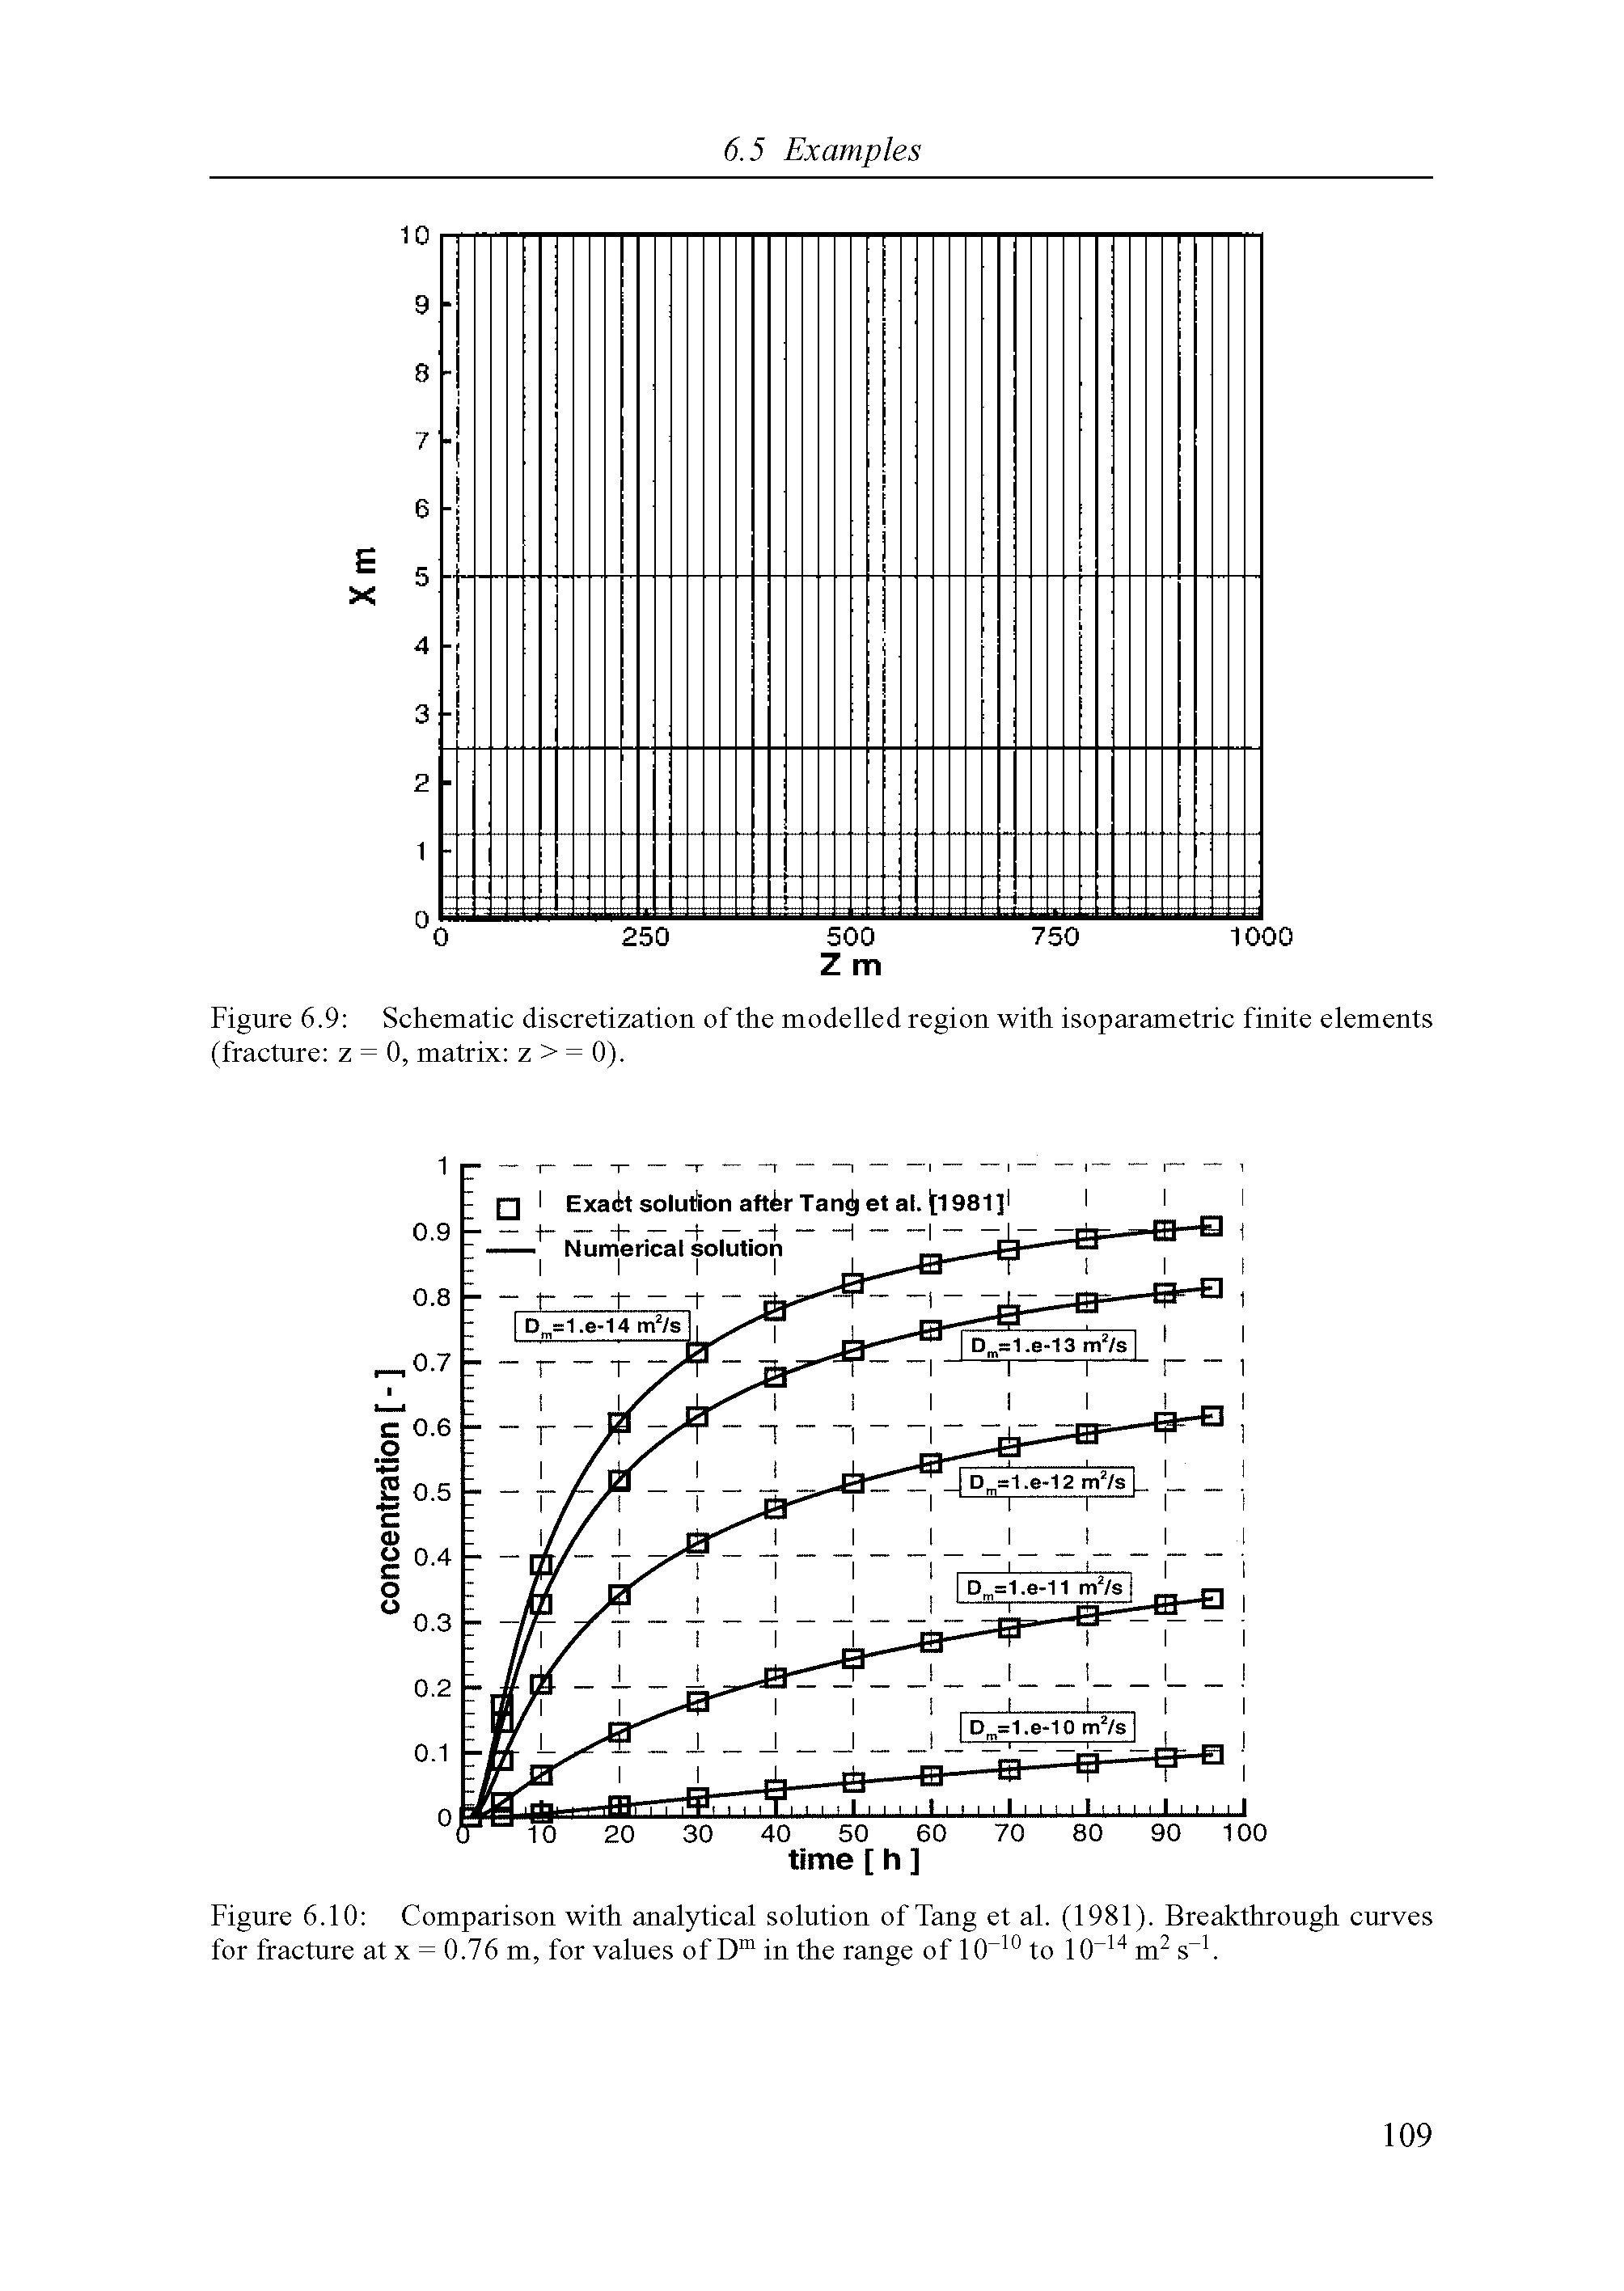 Figure 6.10 Comparison with analytical solution of Tang et al. (1981). Breakthrough curves for fracture at x = 0.76 m, for values of D in the range of 10 to lO m s . ...